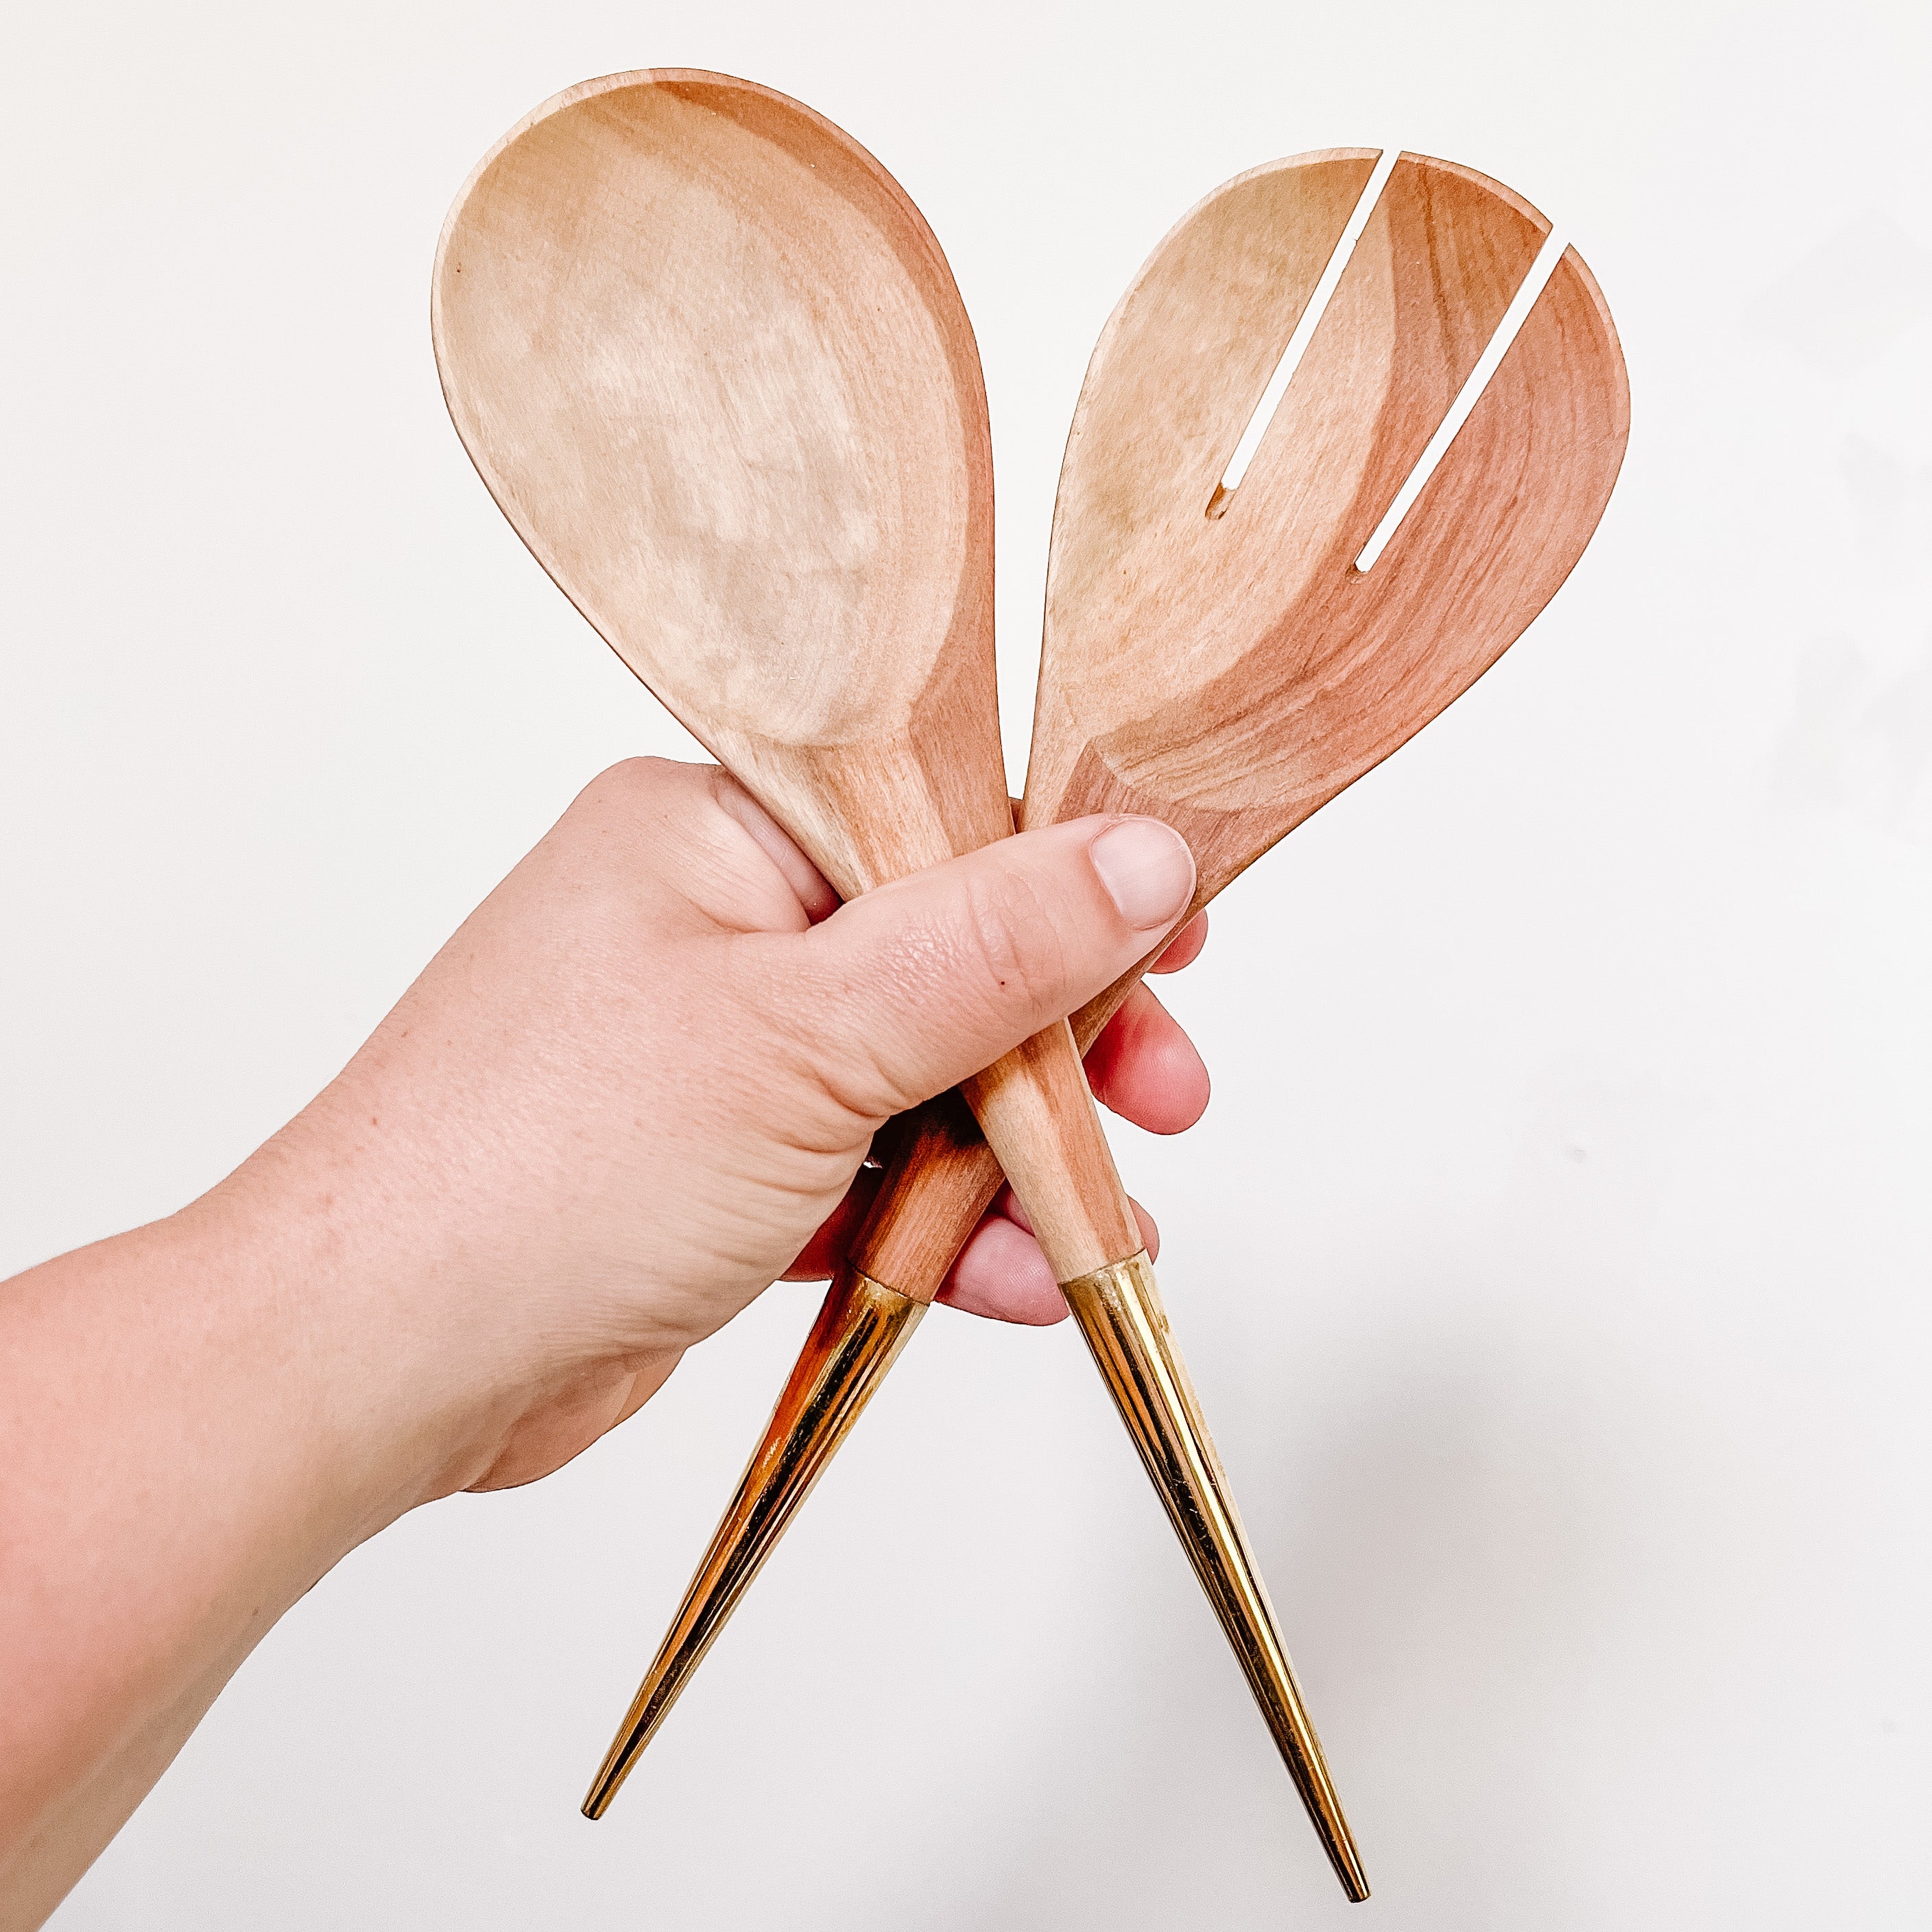 JustOne's handcrafted wooden salad spoons with a handle made of brass that comes to a point, made in Kenya